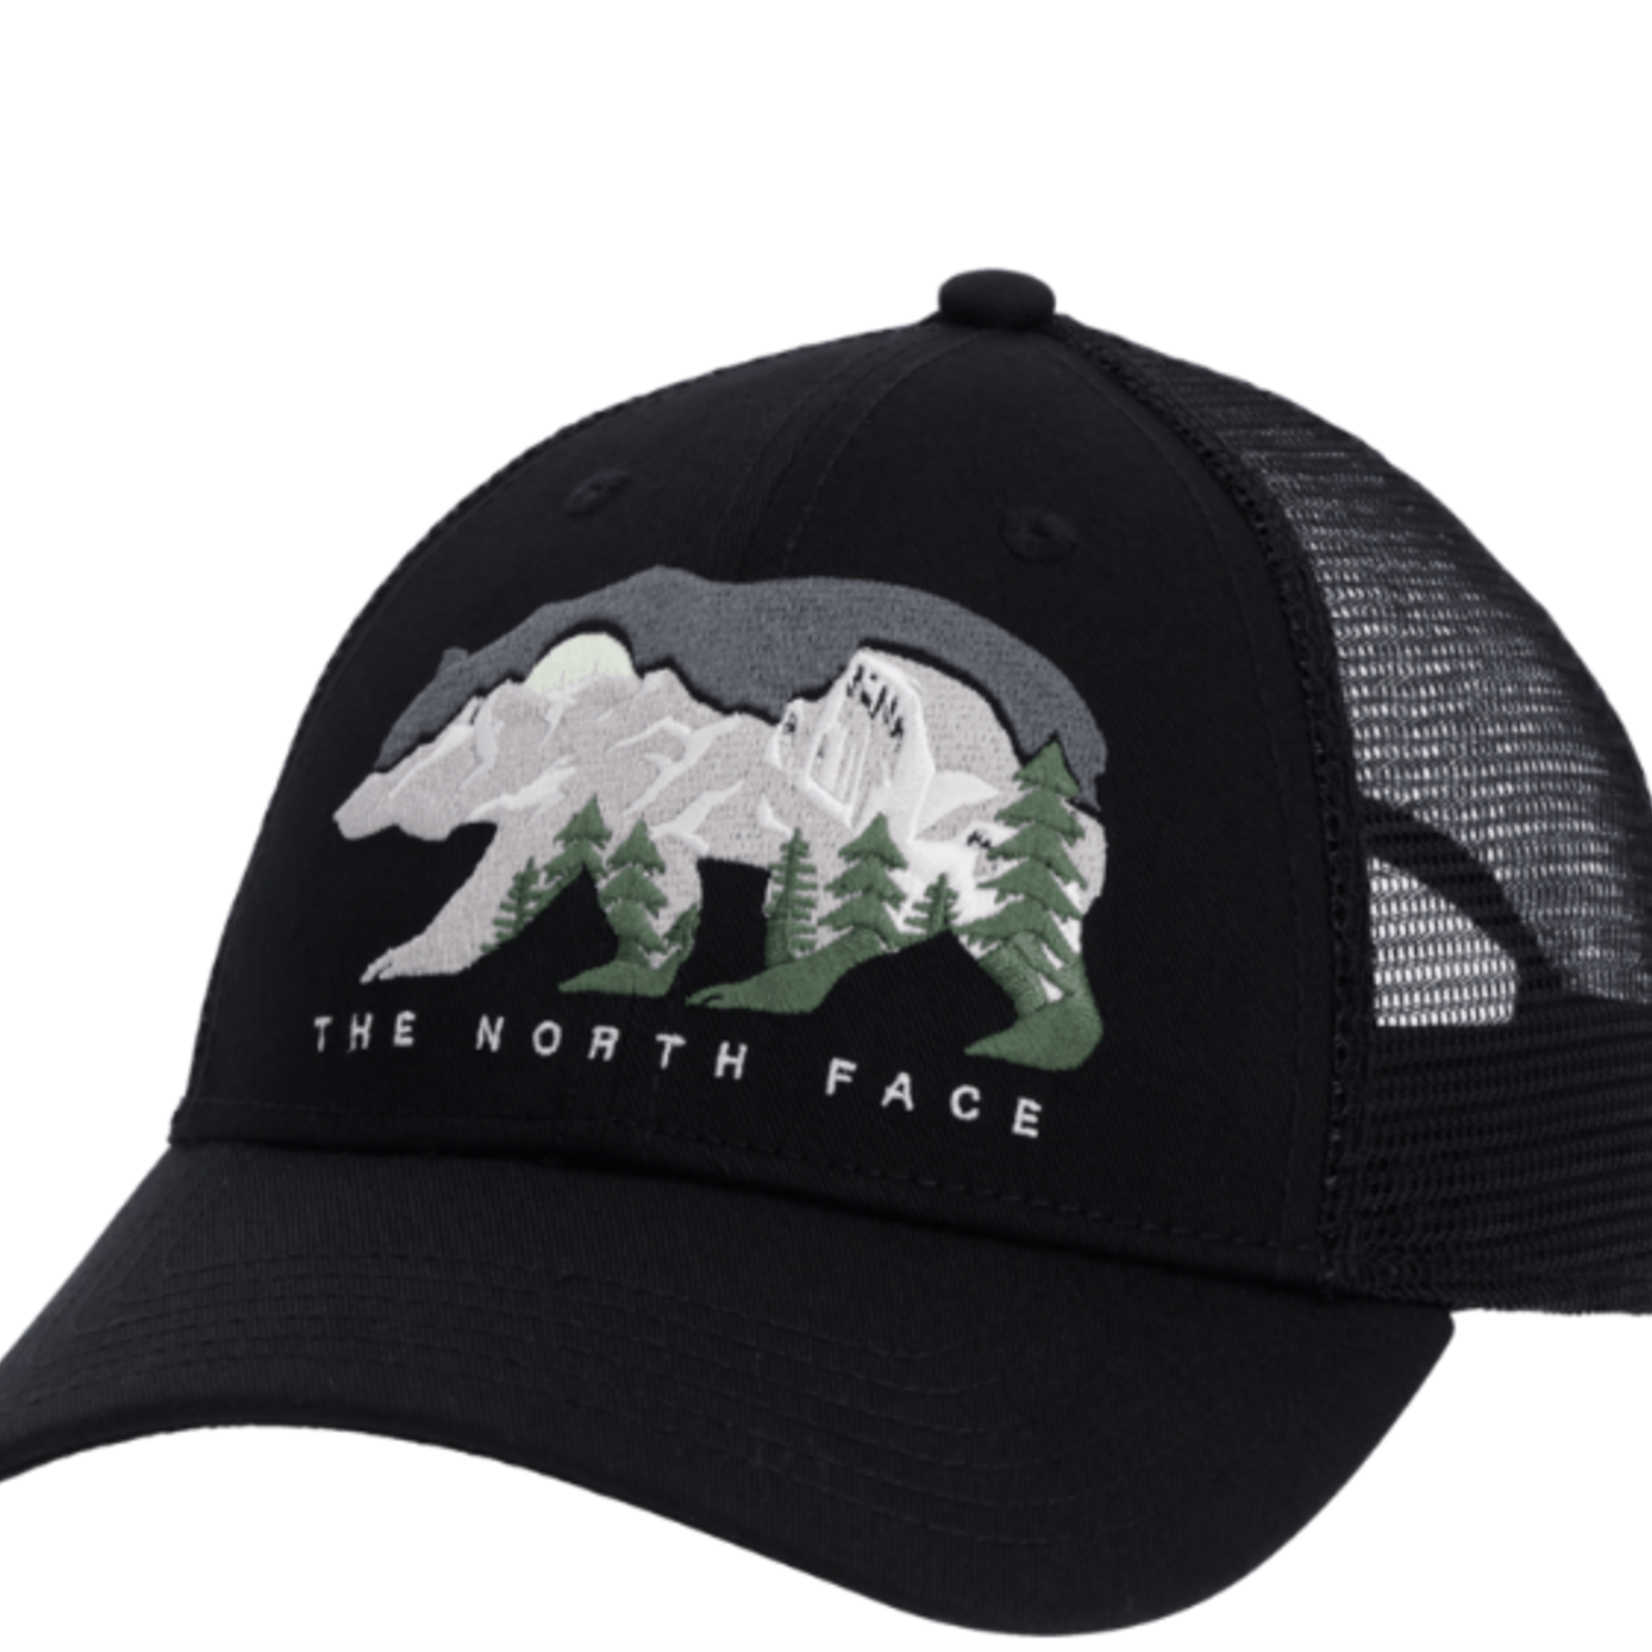 The North Face The North Face Hat, Embroidered Mudder Trucker, Mens, OS